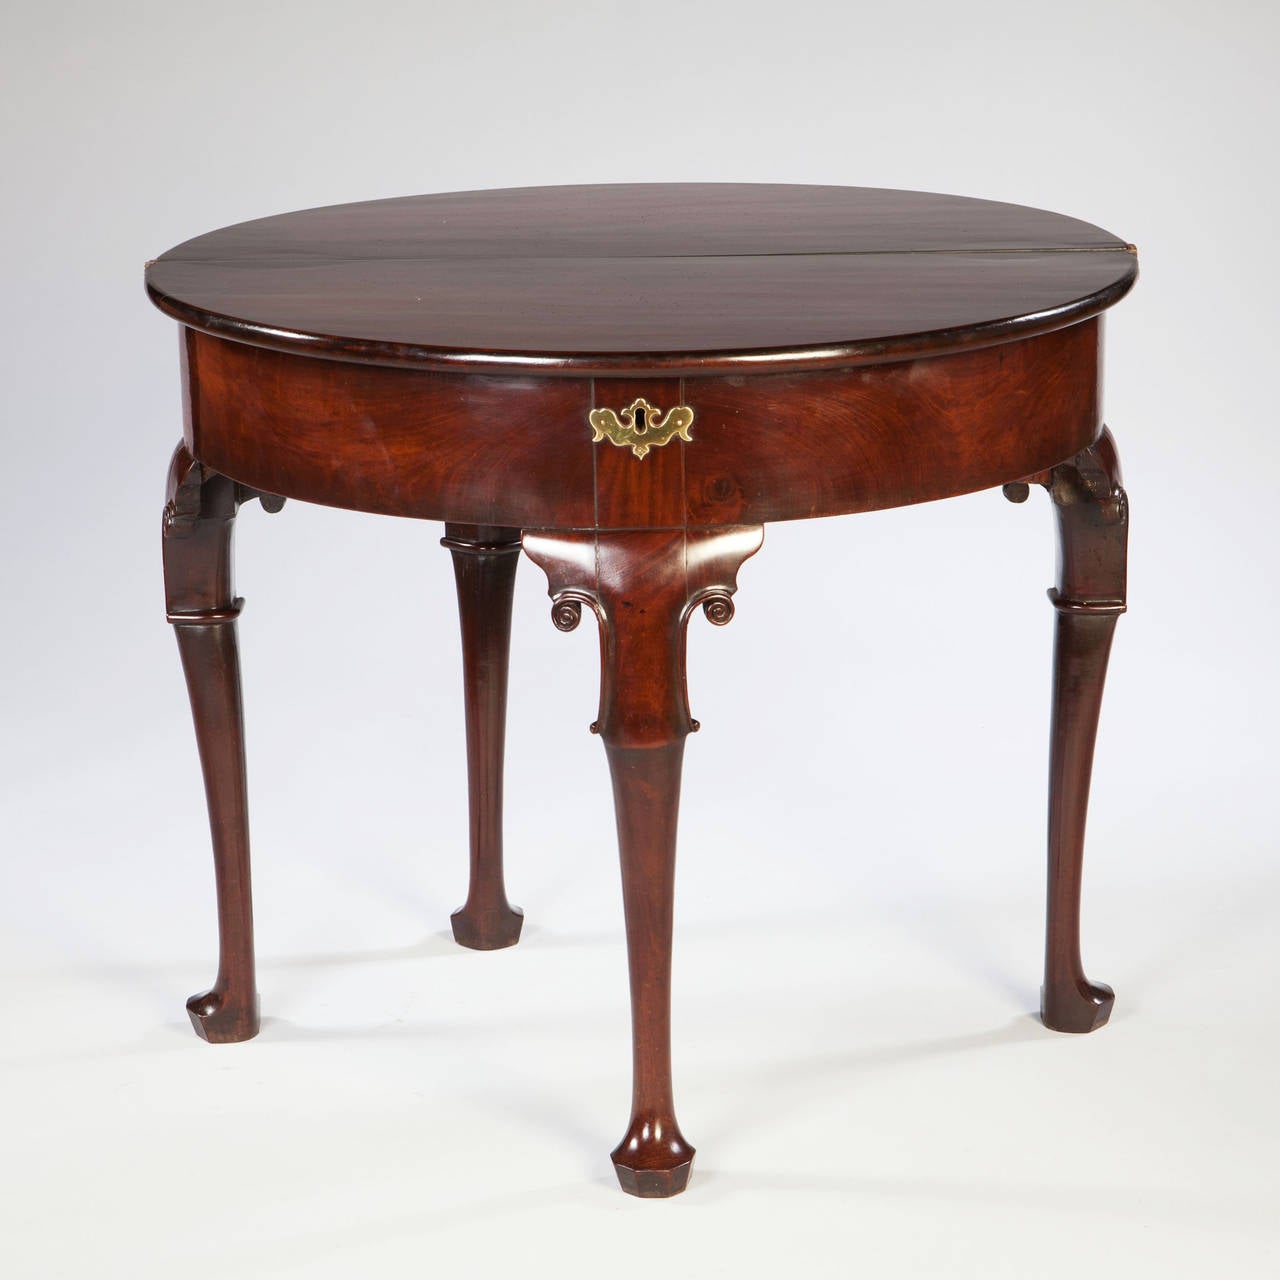 A rare mid eighteenth century mahogany tea table with central leg with stylised scrolls and hexagonal shaped foot, the top with finely figured mahogany, all supported on three tapering legs